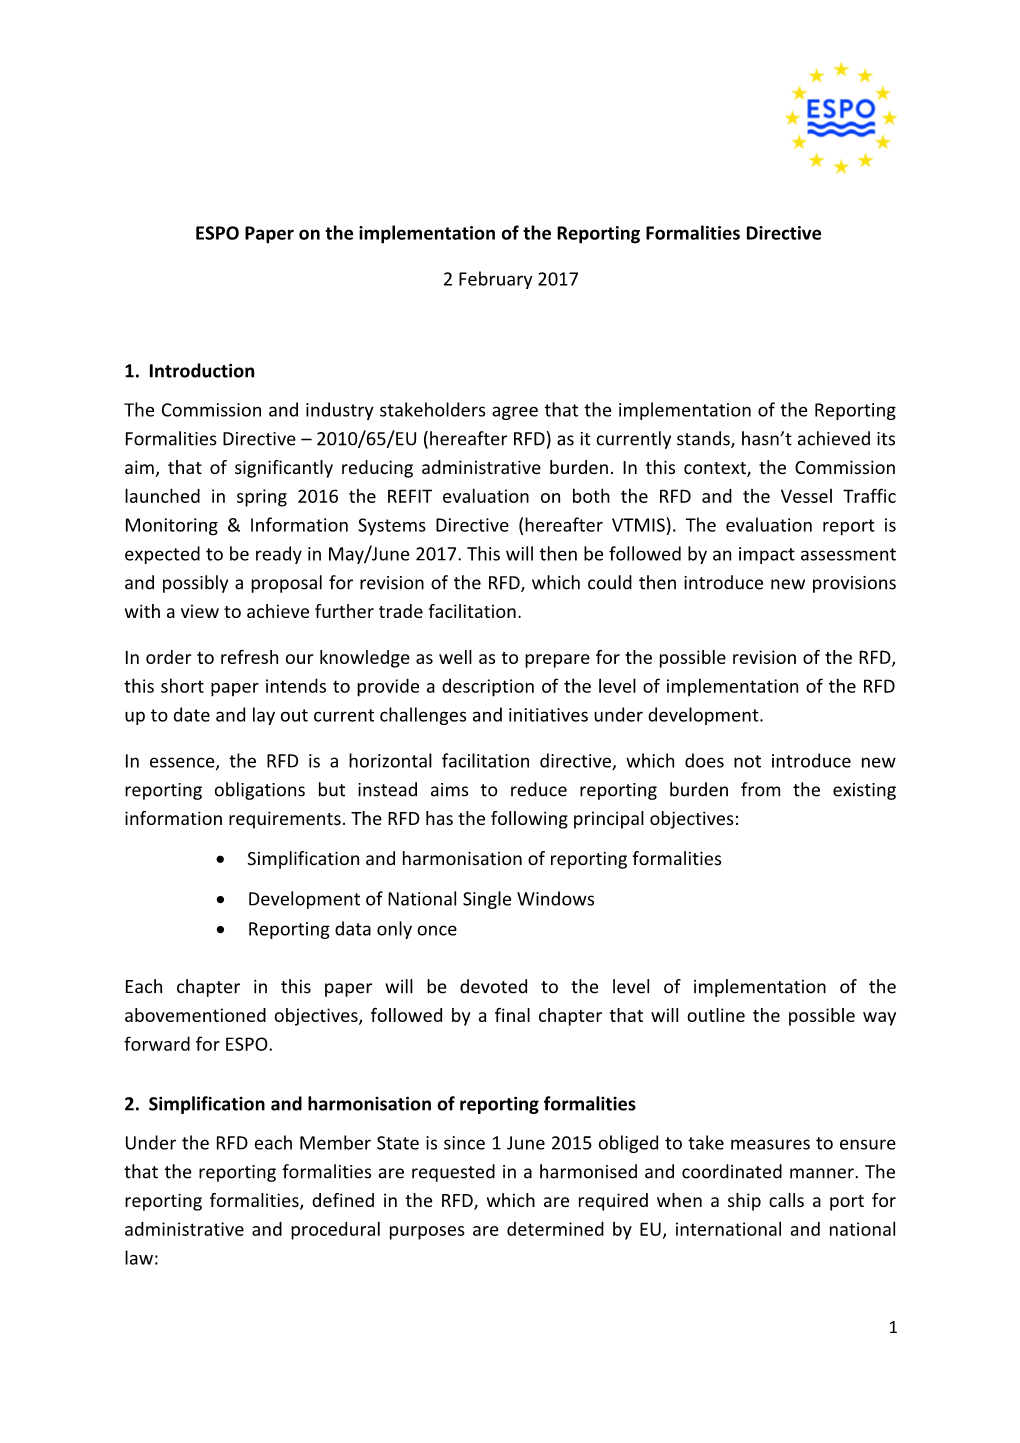 ESPO Paper on the Implementation of the Reporting Formalities Directive